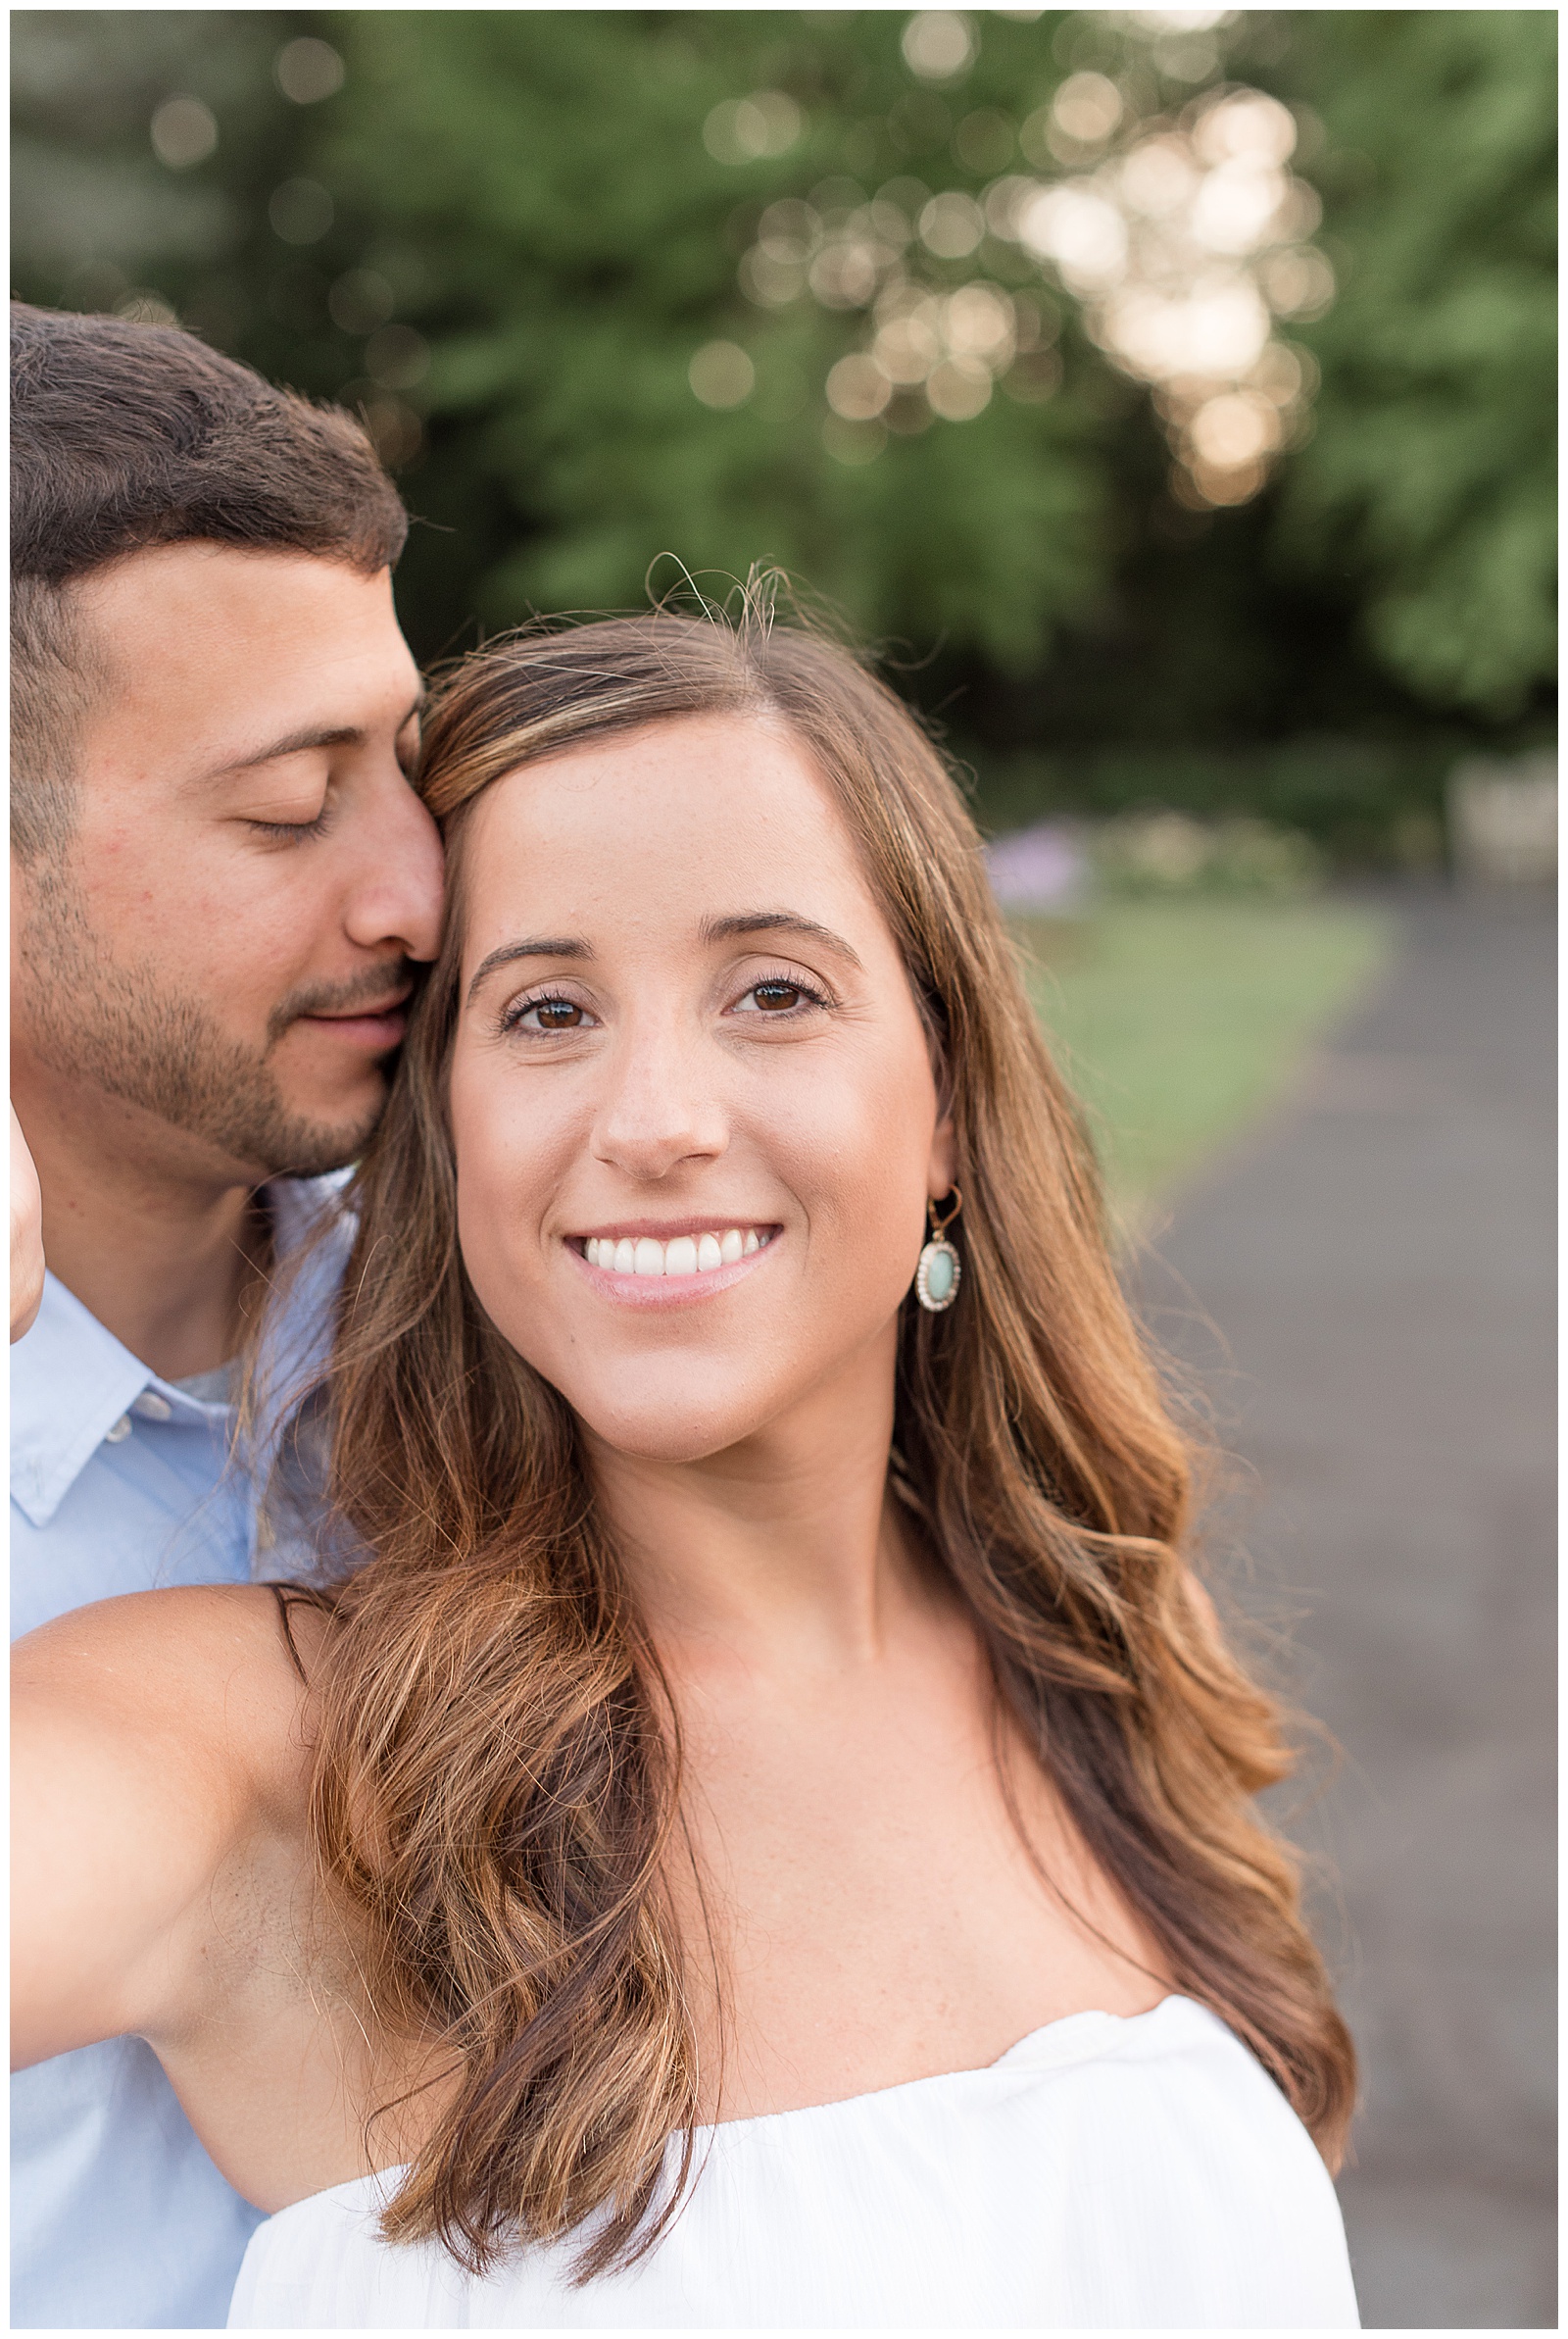 girl smiling at camera while guy nuzzles in